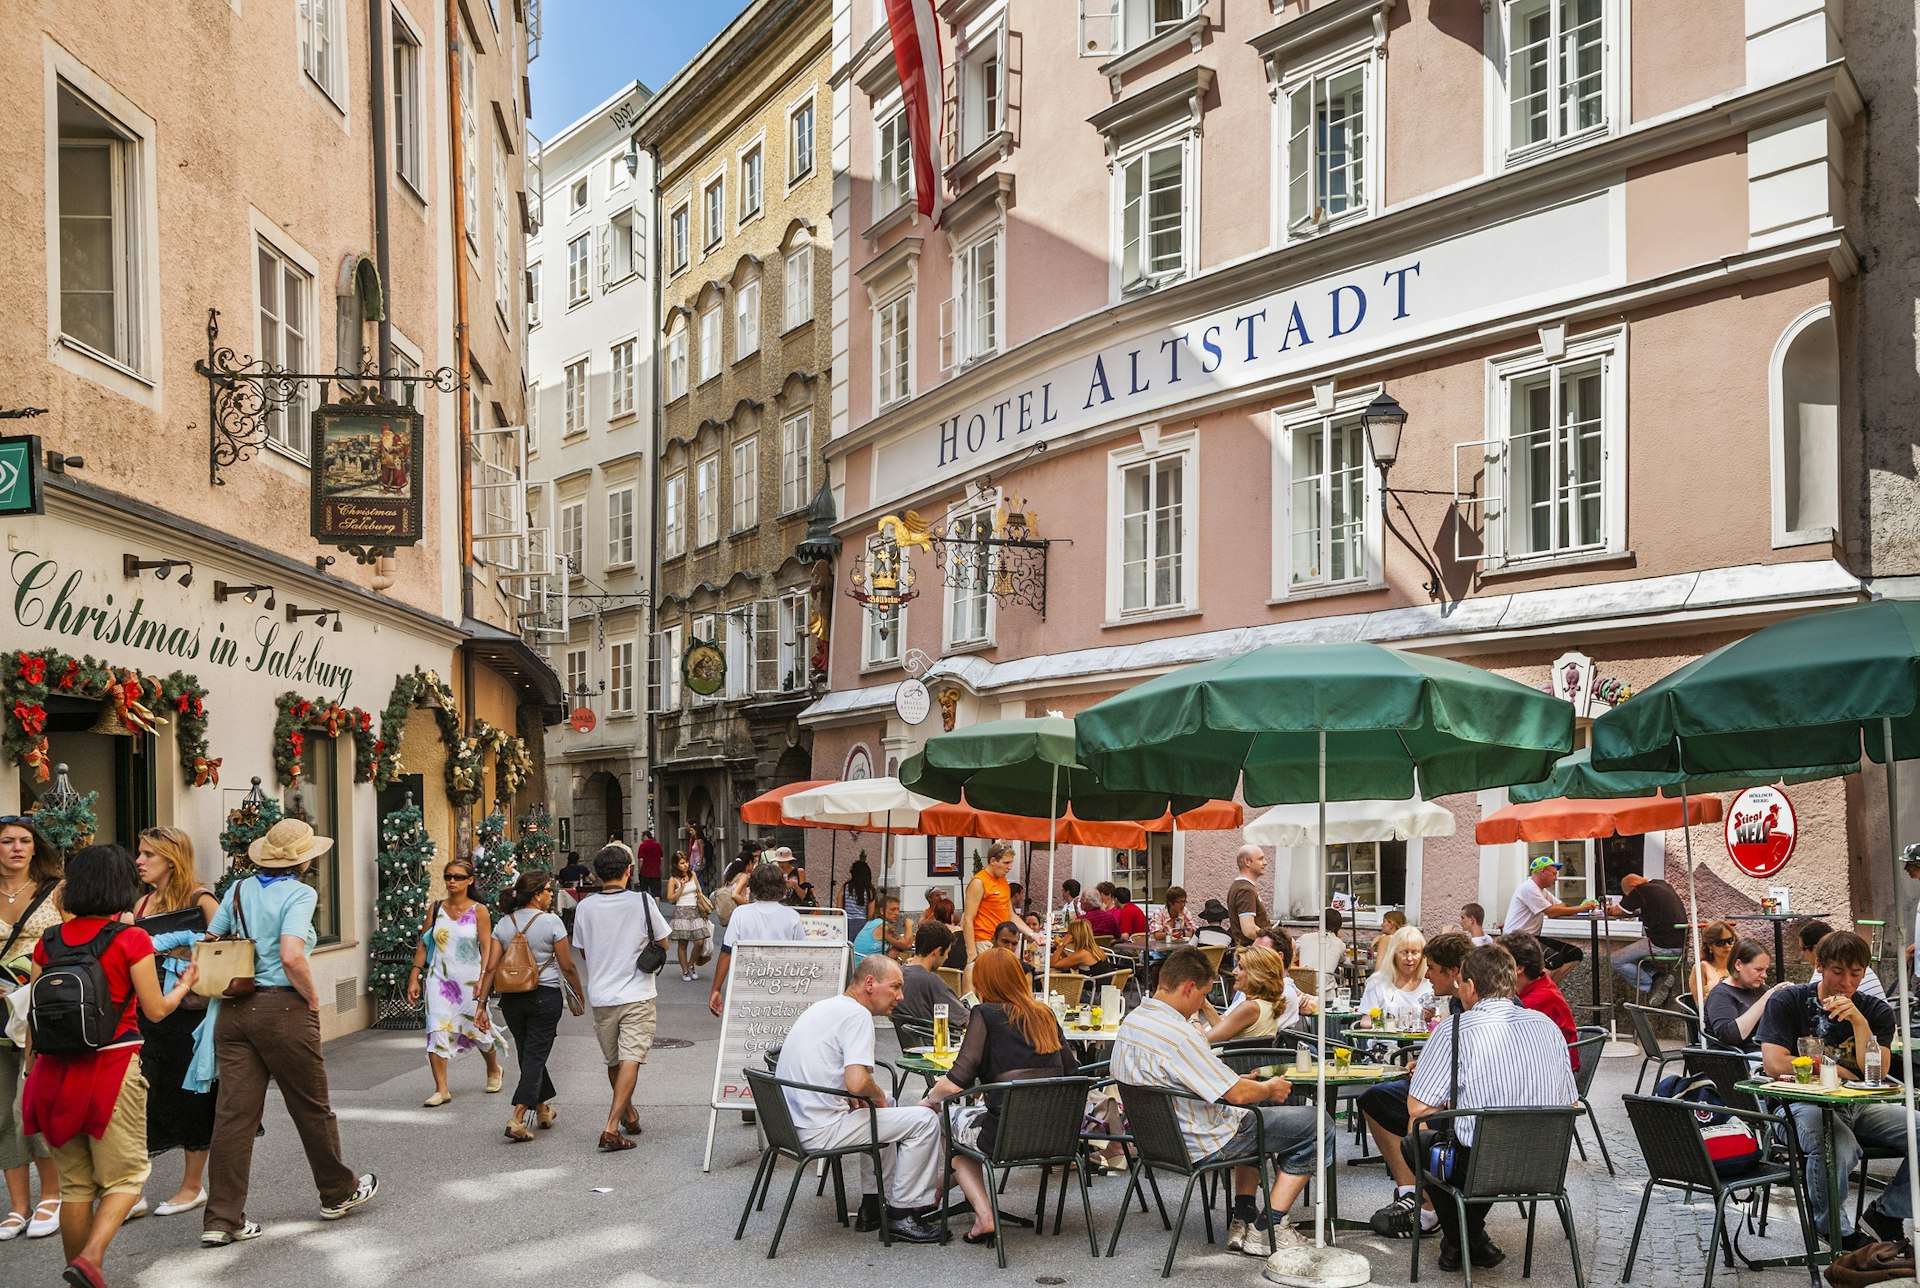 People sit at outdoor dining tables on the pedestrianized street of Salzburg's Old Town